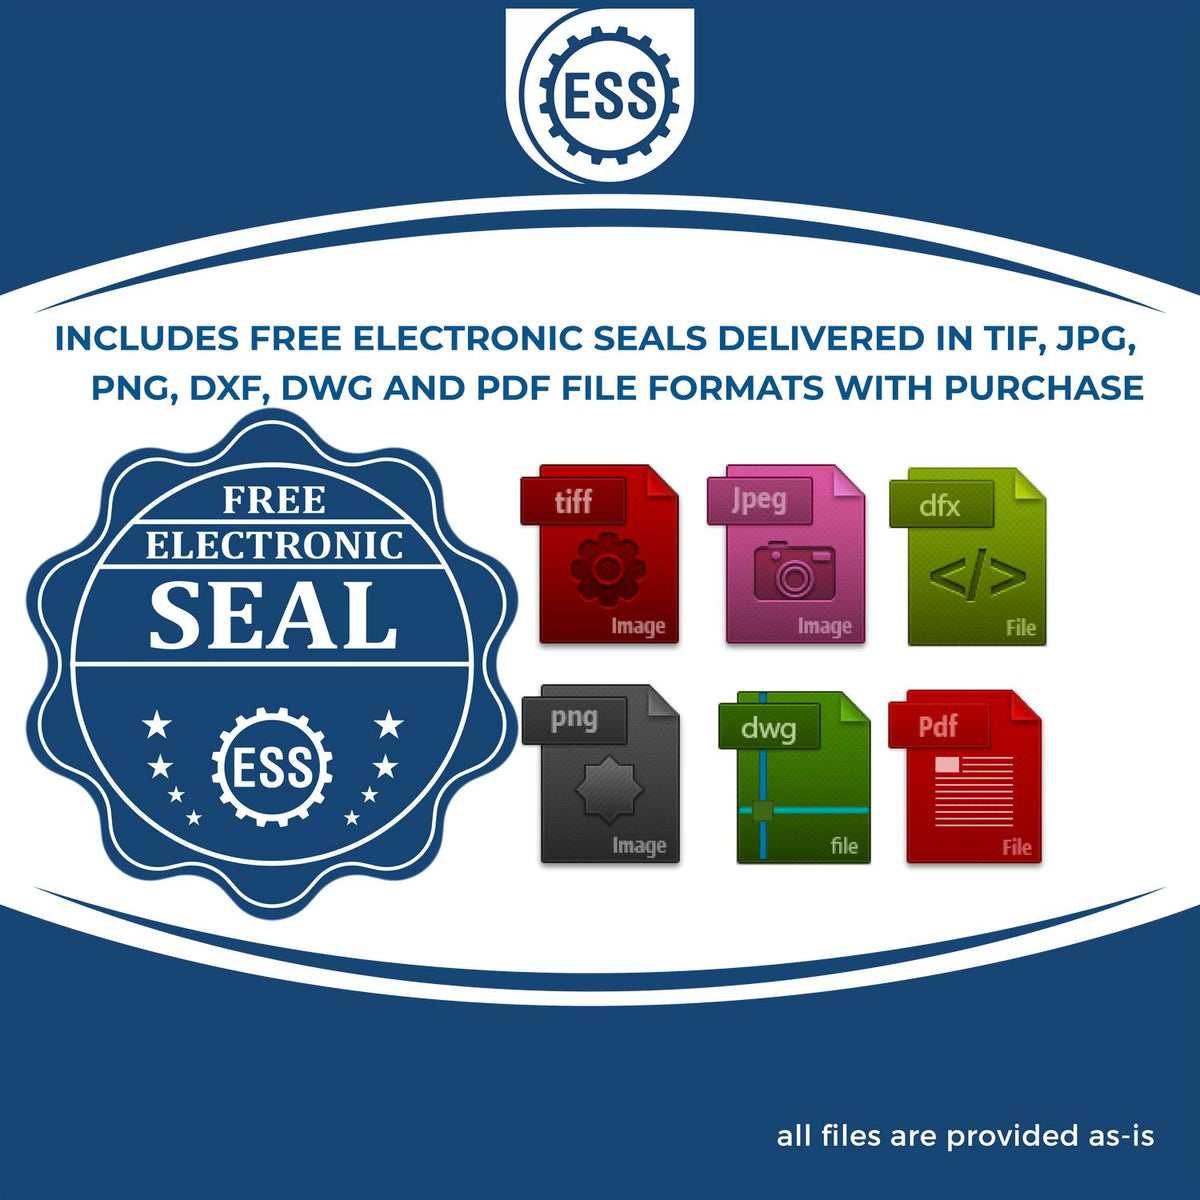 An infographic for the free electronic seal for the Heavy-Duty Alabama Rectangular Notary Stamp illustrating the different file type icons such as DXF, DWG, TIF, JPG and PNG.